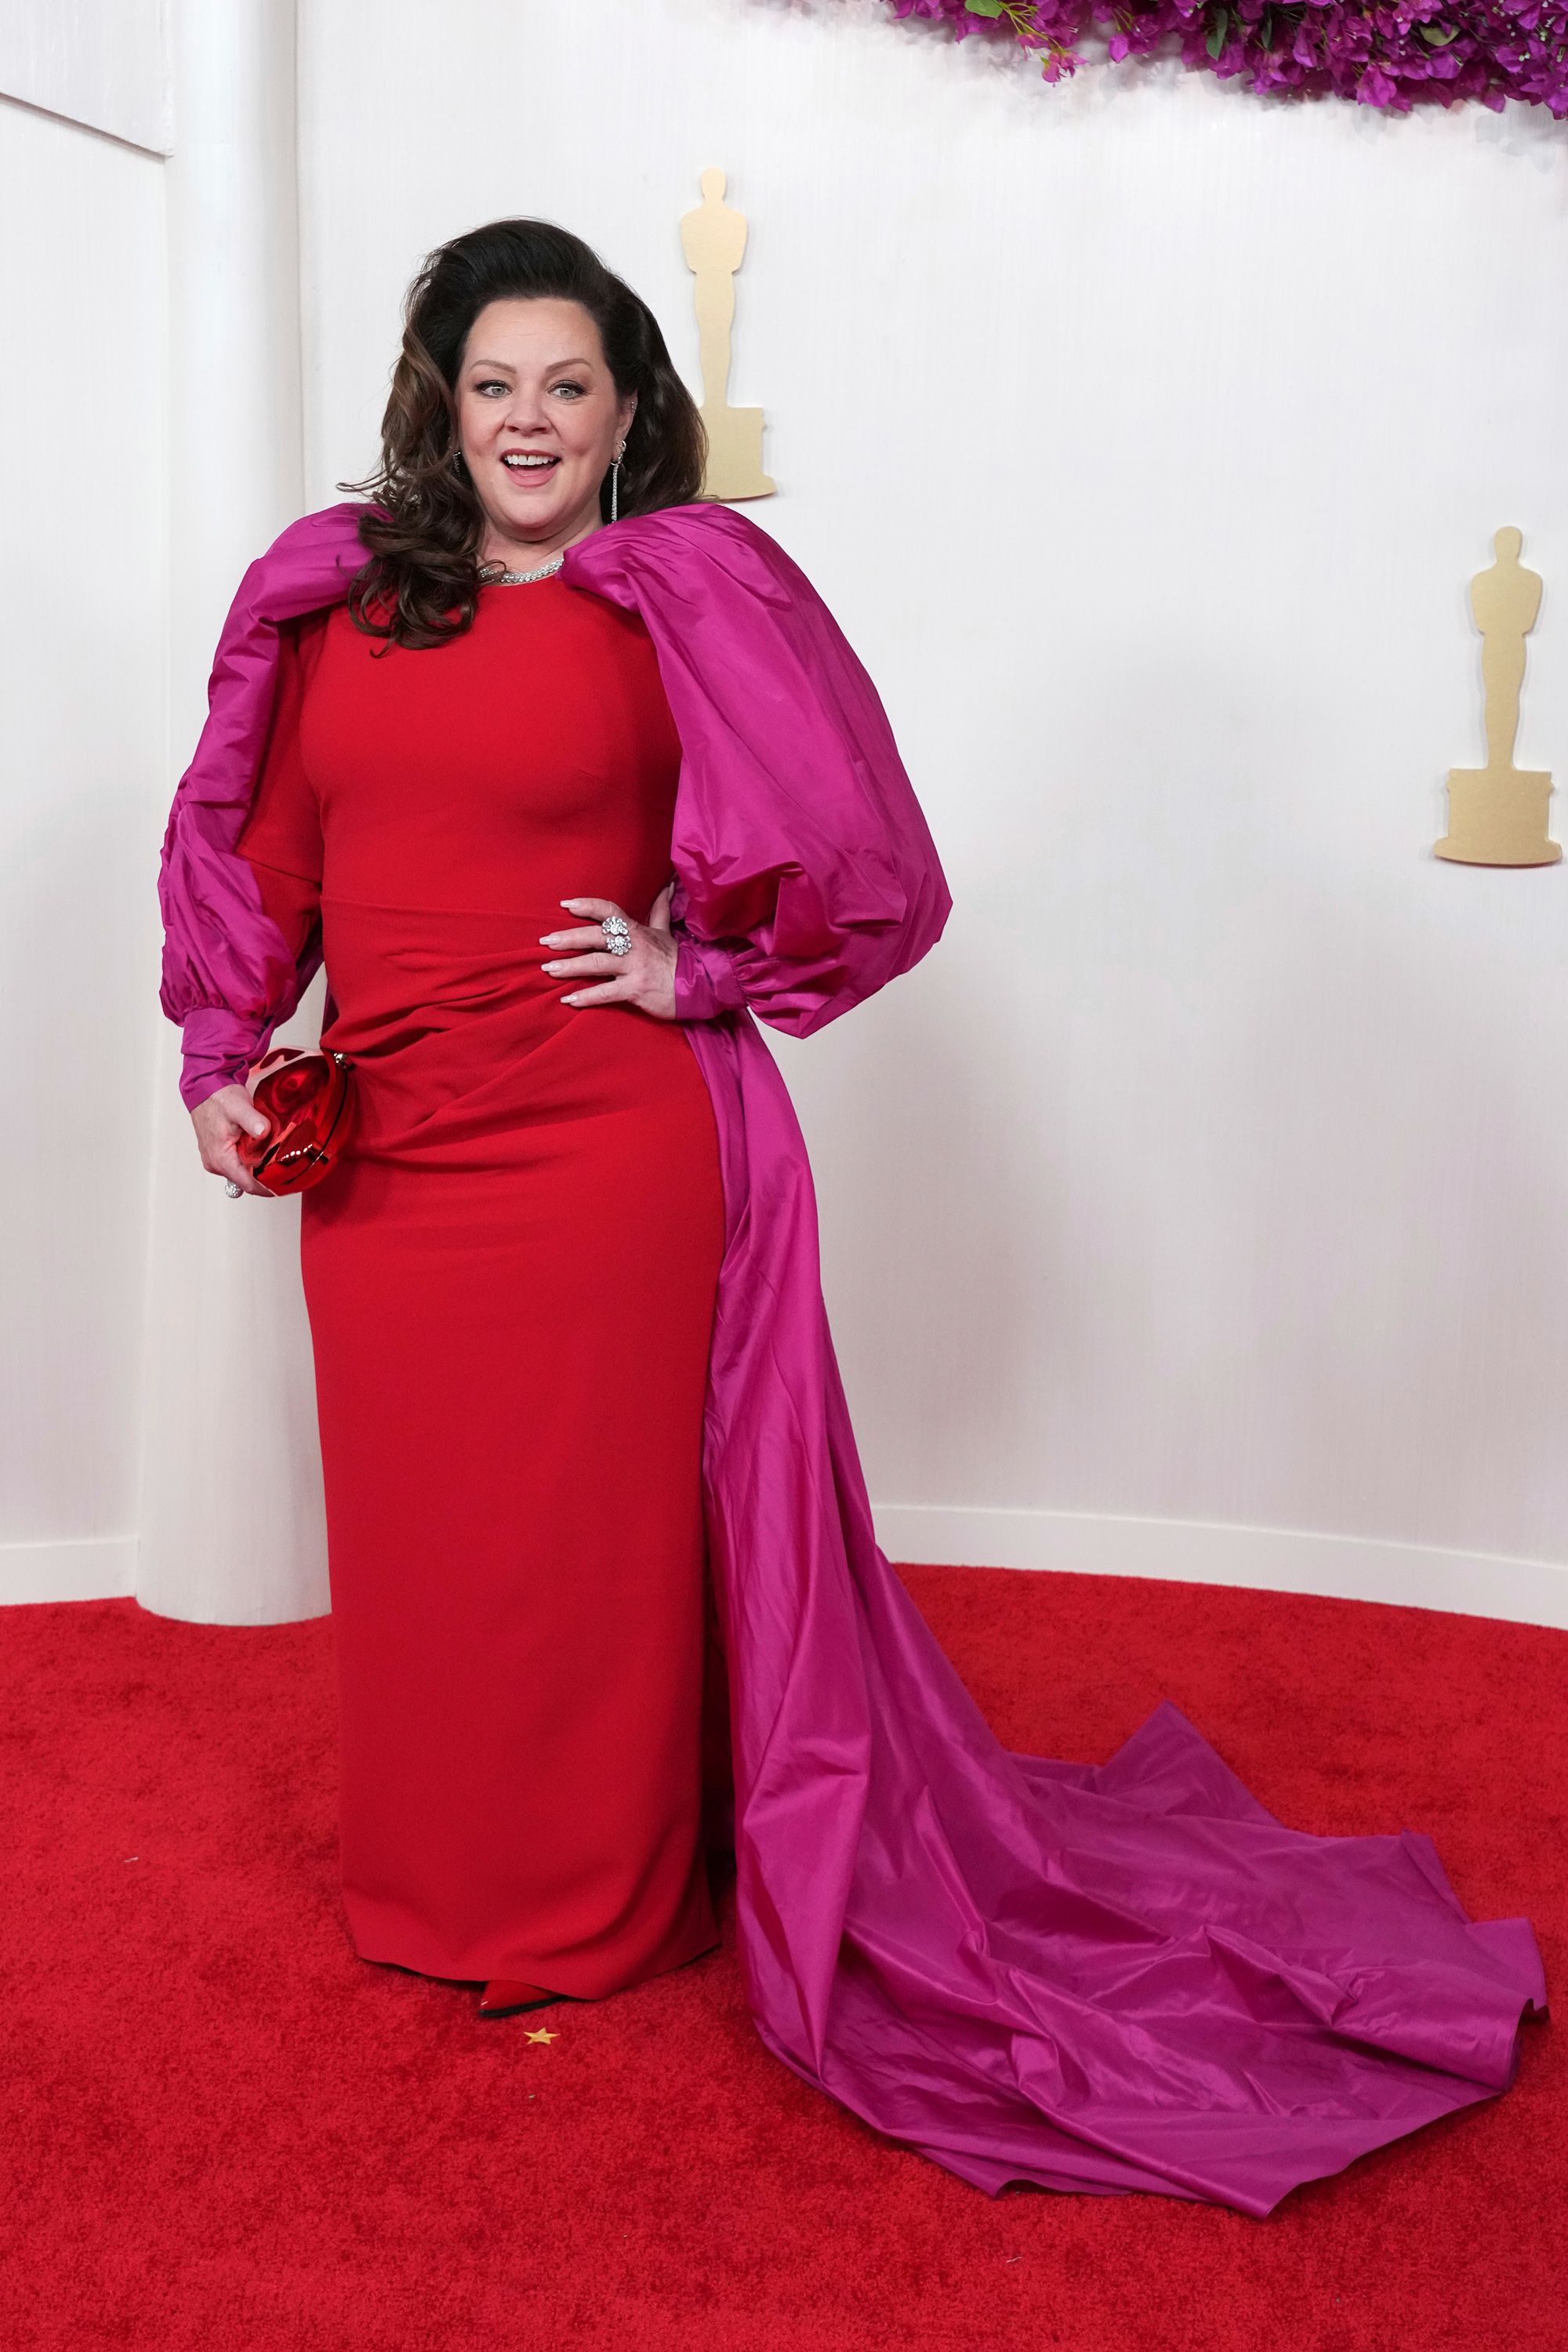 Melissa McCarthy channeled Old Hollywood glamour in a red gown with magenta sleeves. The actor accessorized with Dena Kemp jewelry.